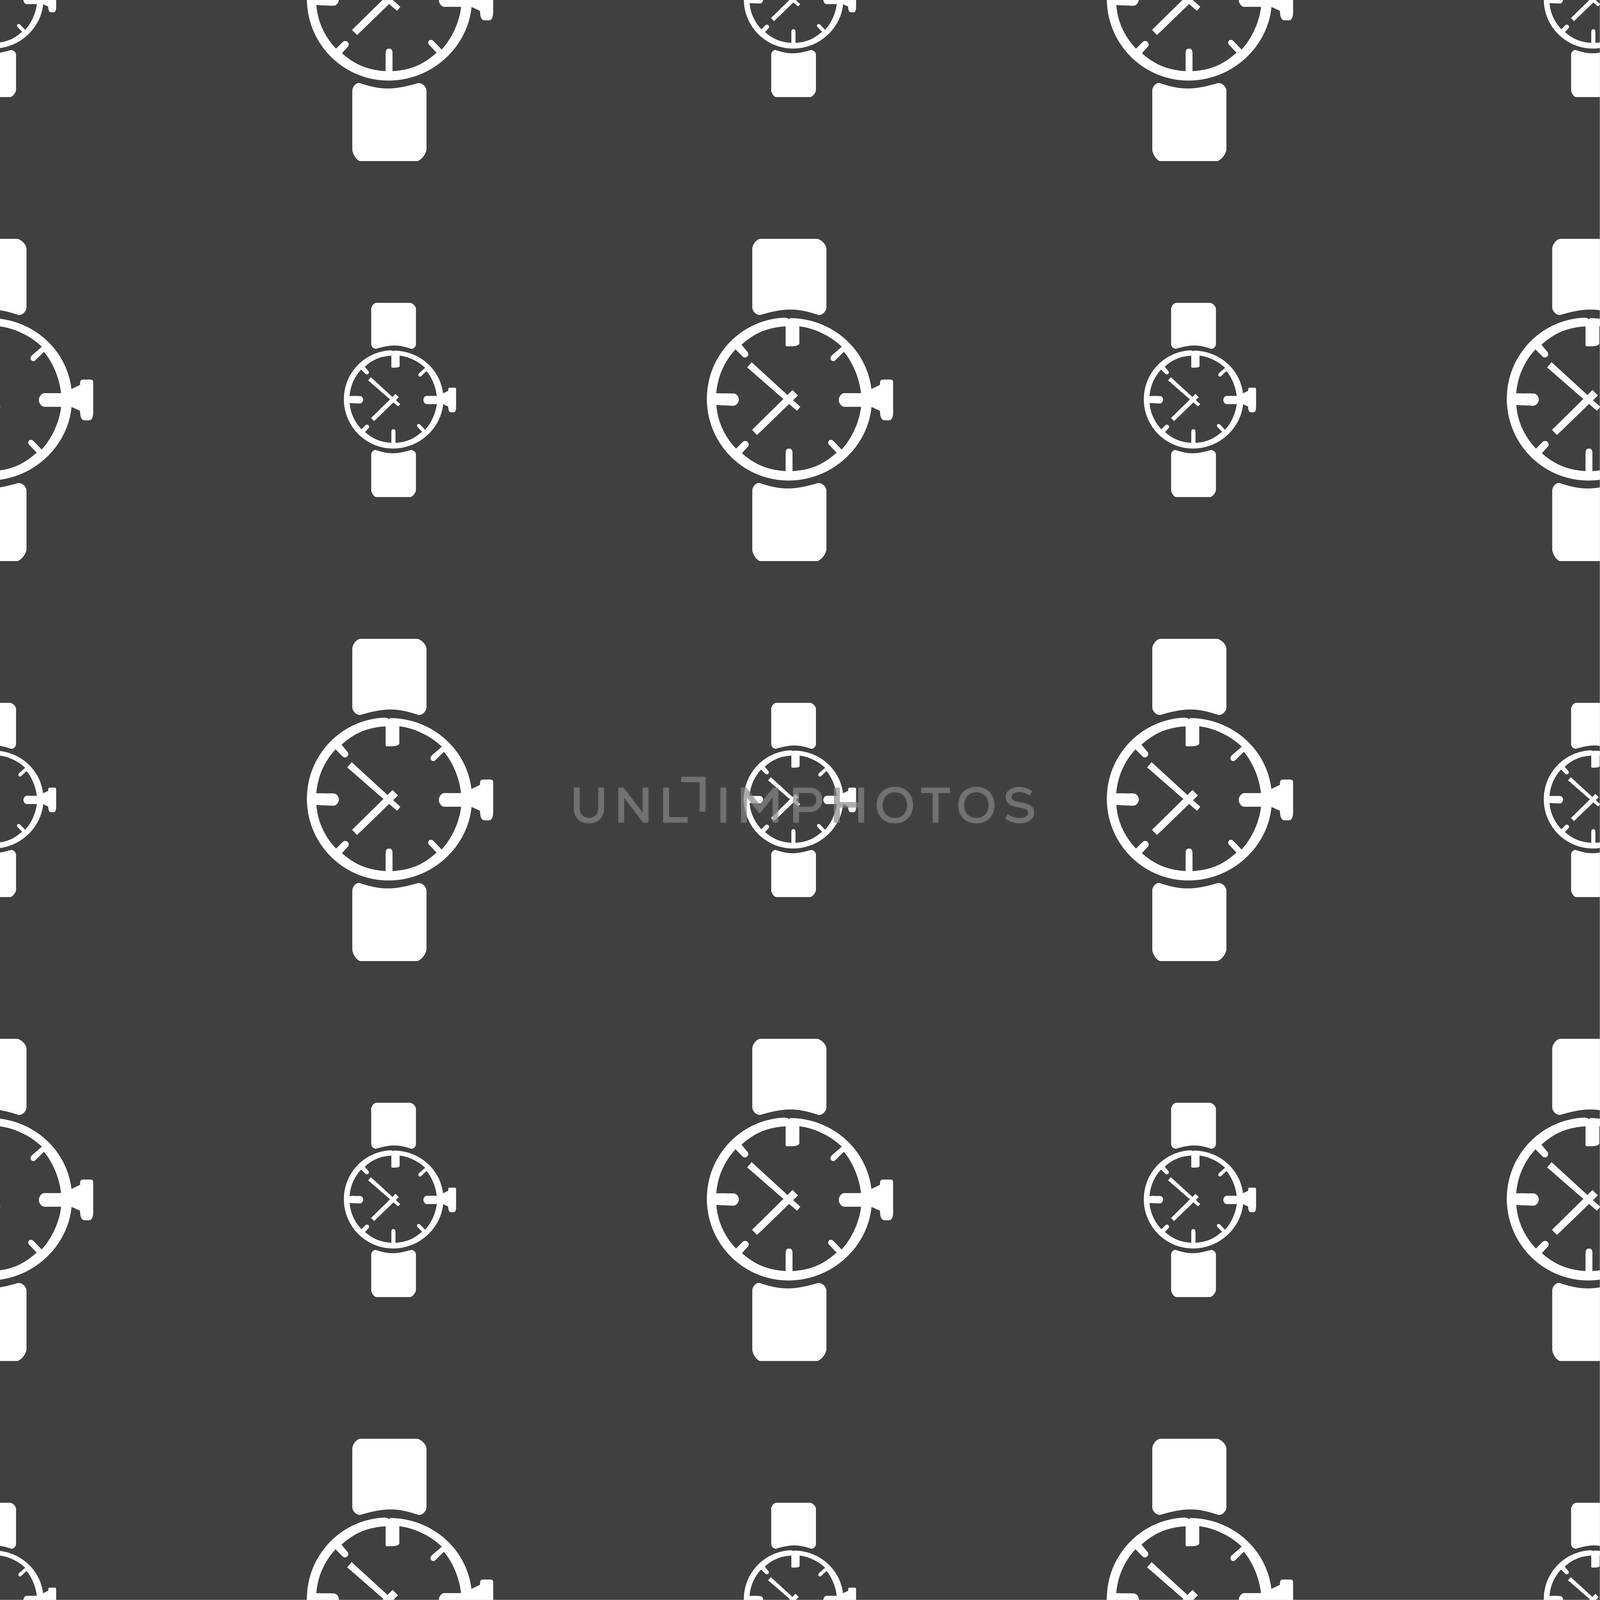 shield icon sign. Seamless pattern on a gray background. illustration